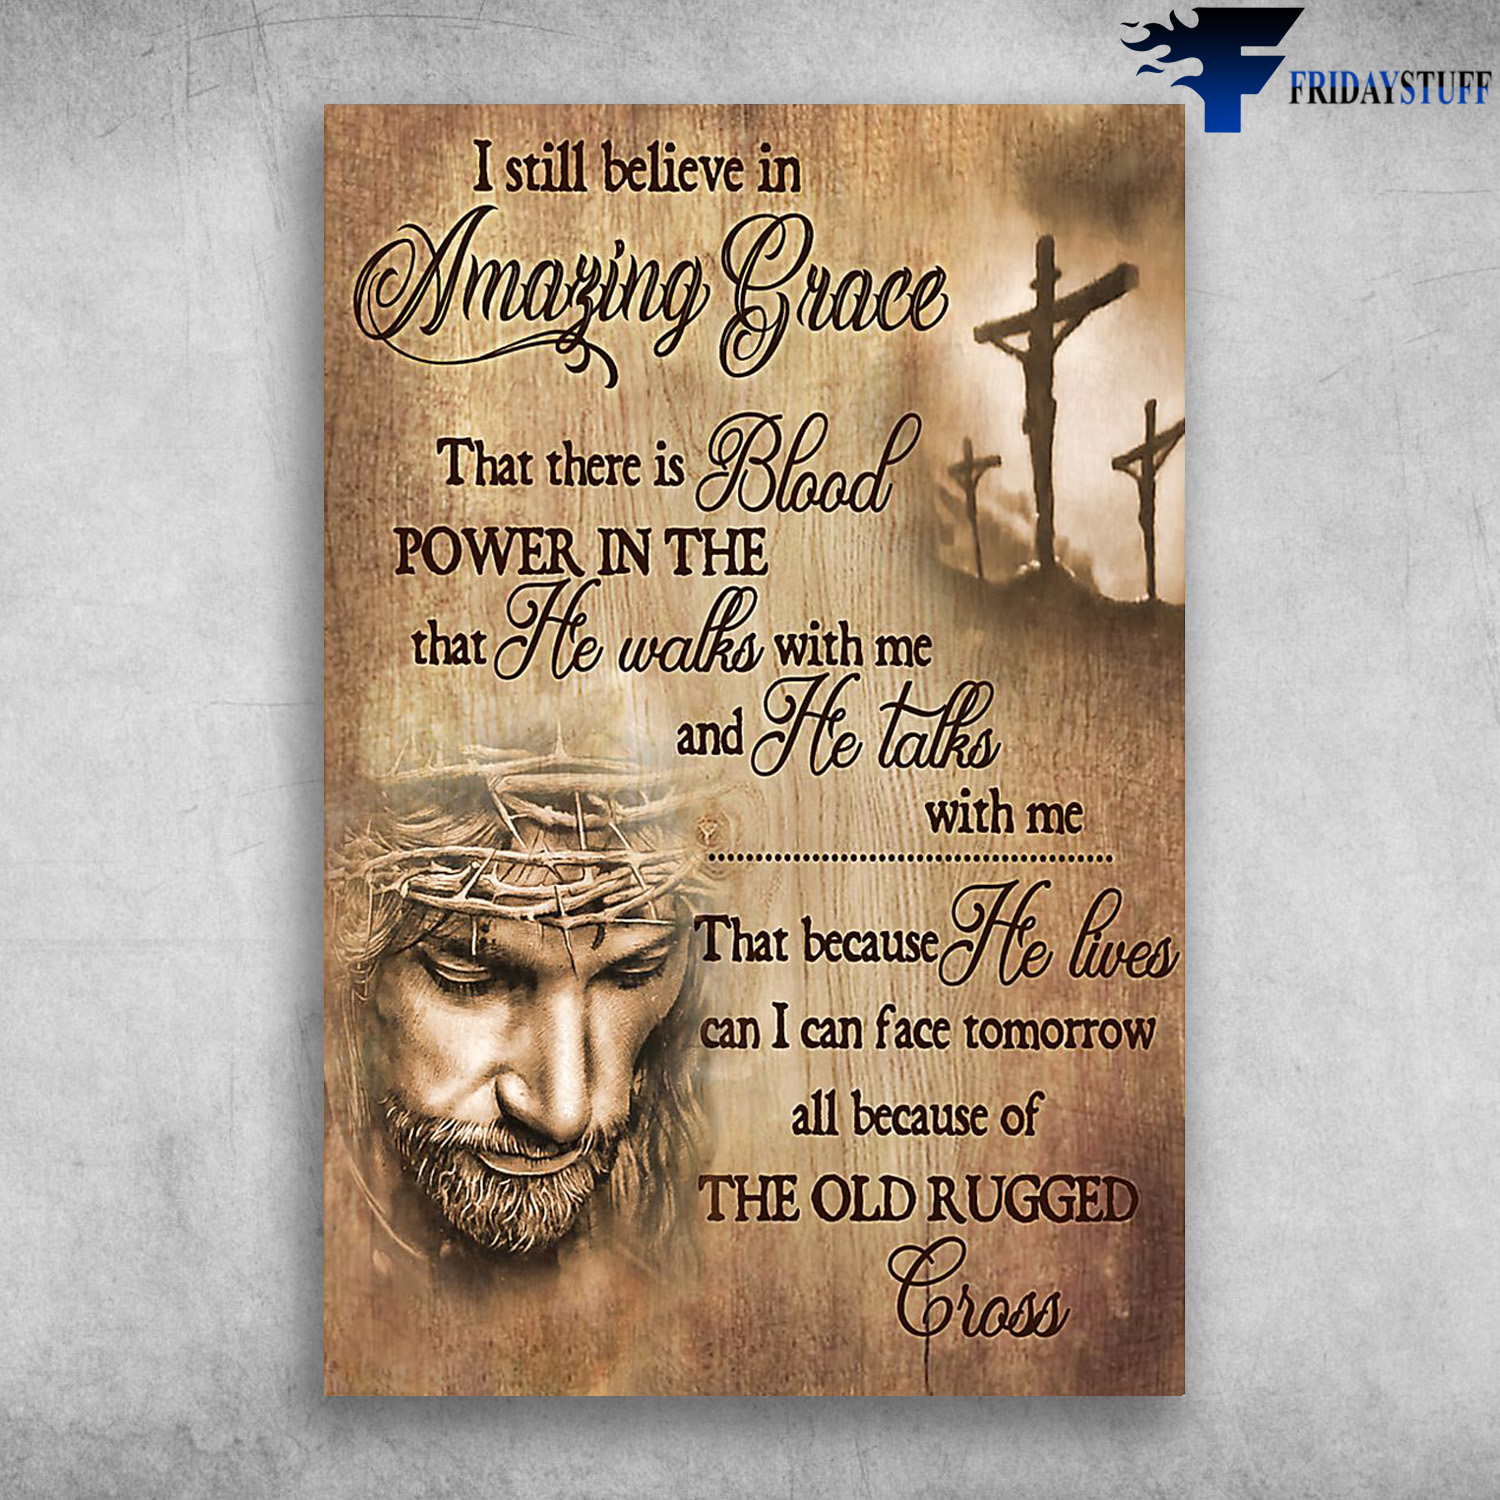 God And The Cross - I Still Believe In Amazing Grace, That There Is Power In The Blood, That He Walks With Me, That Because He Lives Can I Can Face Tomorrow, All Because Of The Old Rugged Cross